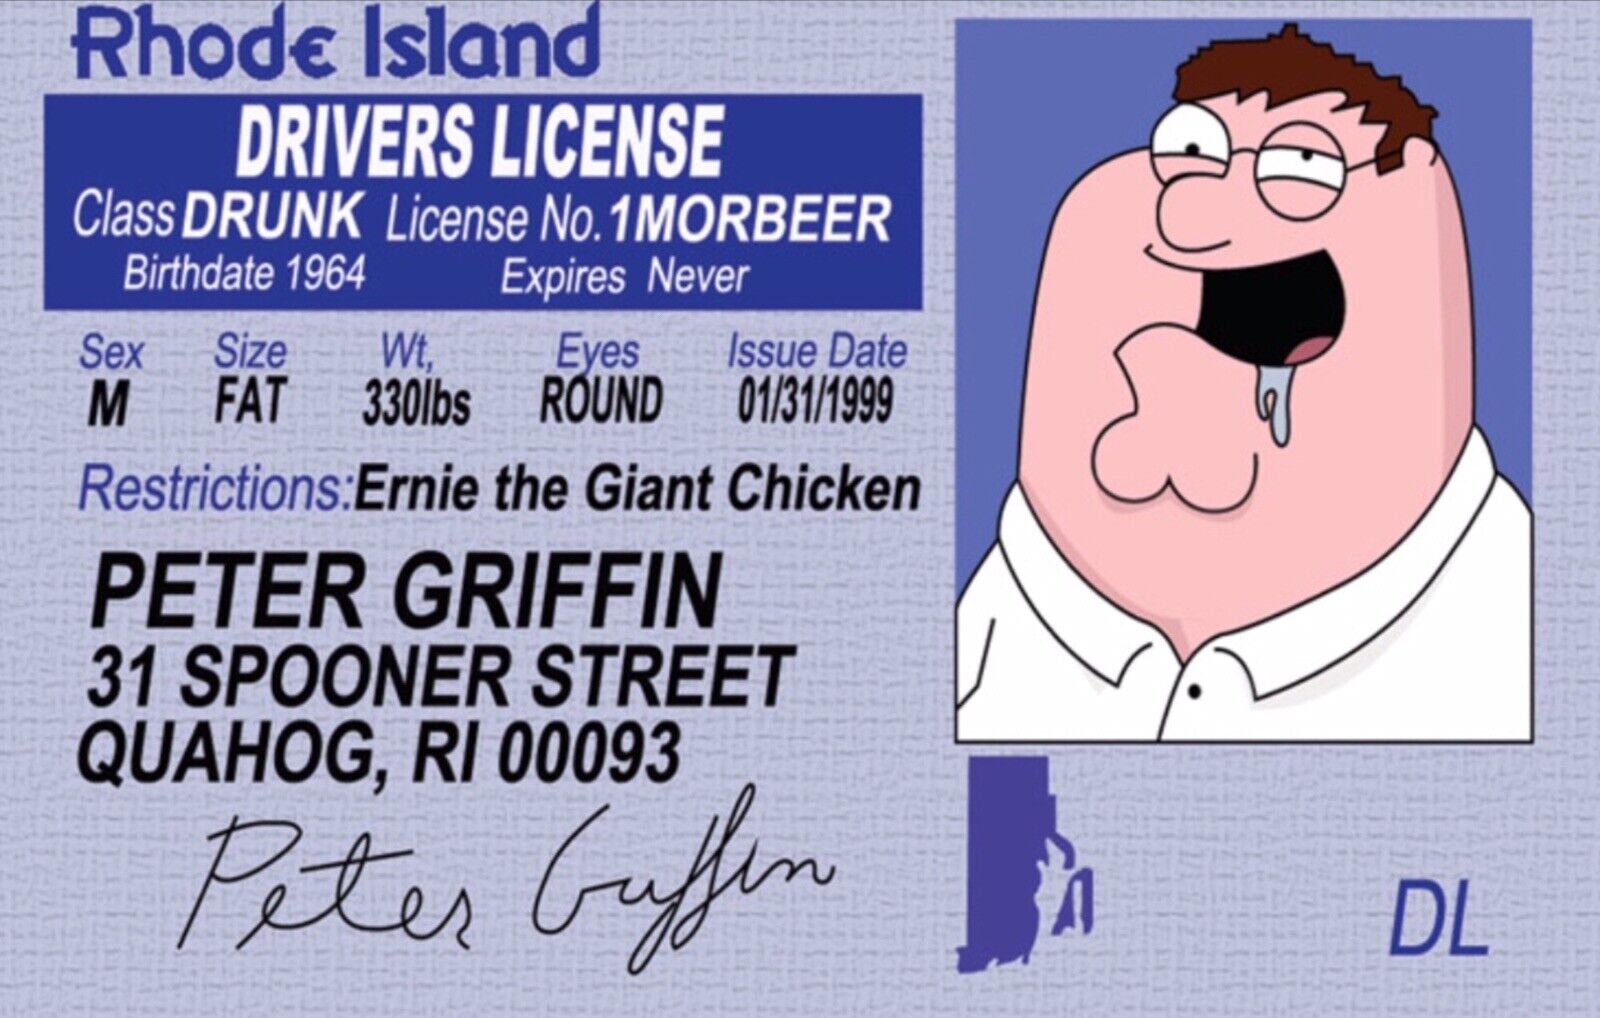 Peter Griffin of Family Guy Drivers License on a 3.5” X 2.5” Refrigerator Magnet